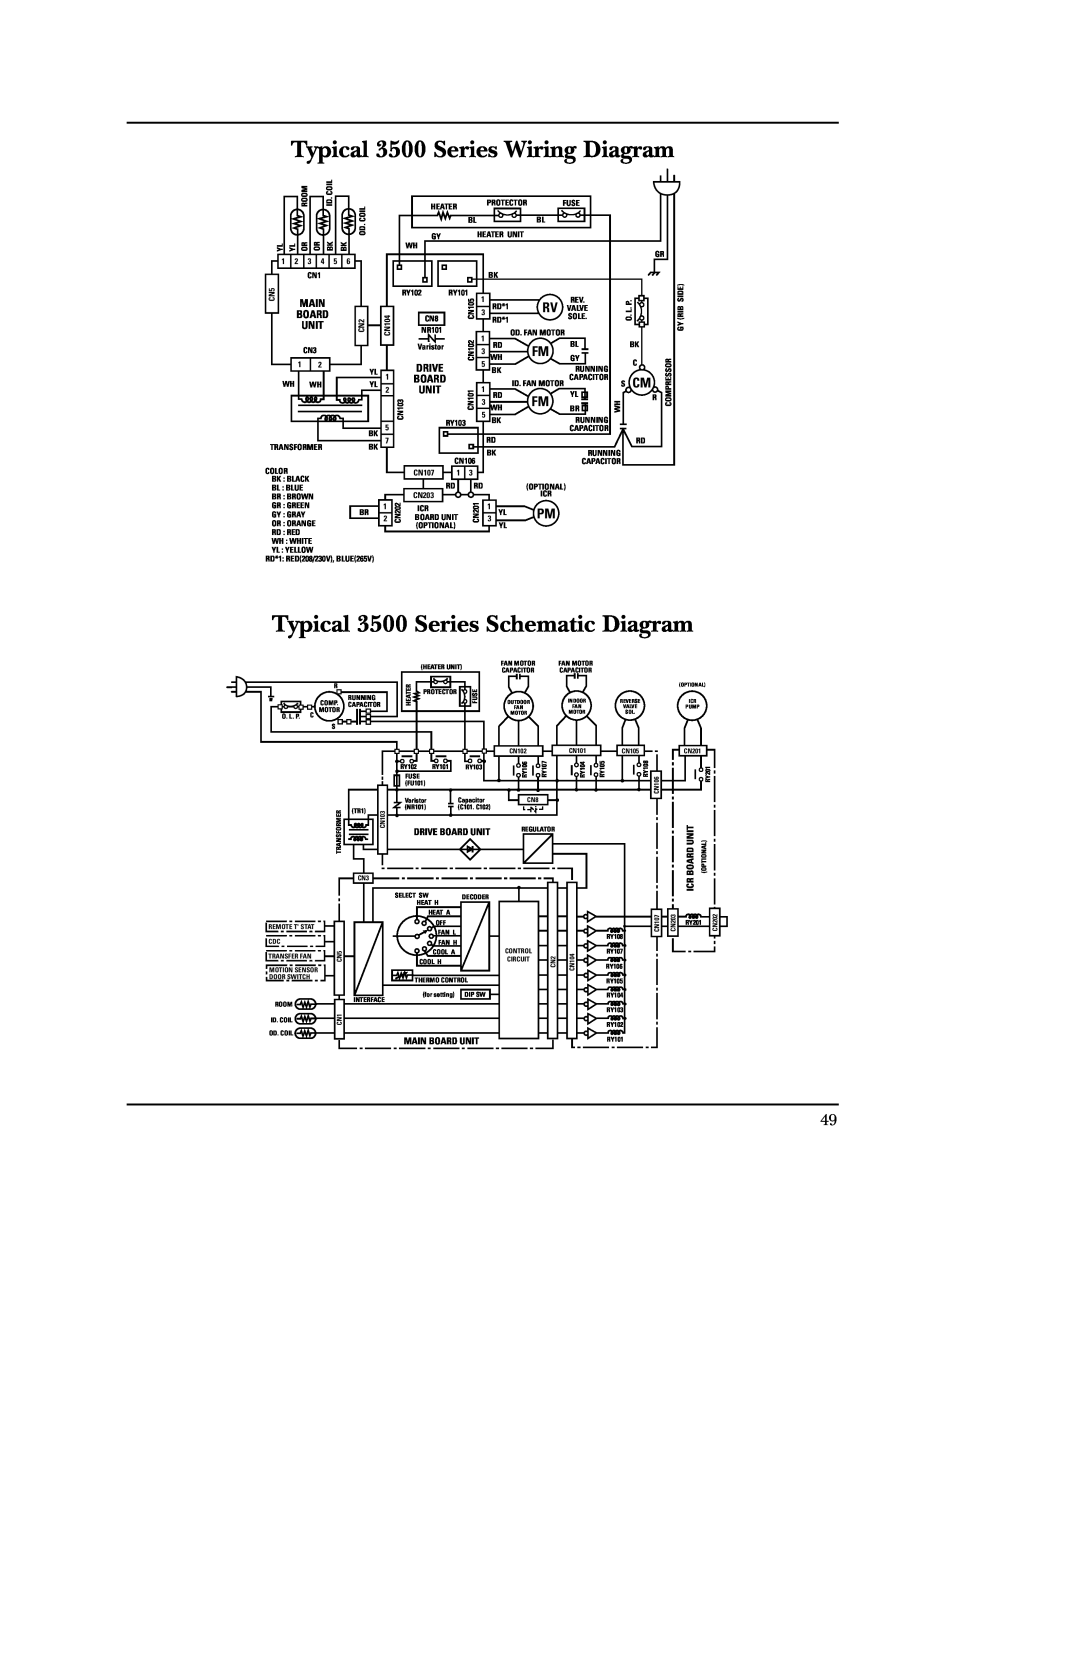 GE 5500 manual Typical 3500 Series Wiring Diagram, Typical 3500 Series Schematic Diagram, Main, Drive Board Unit 